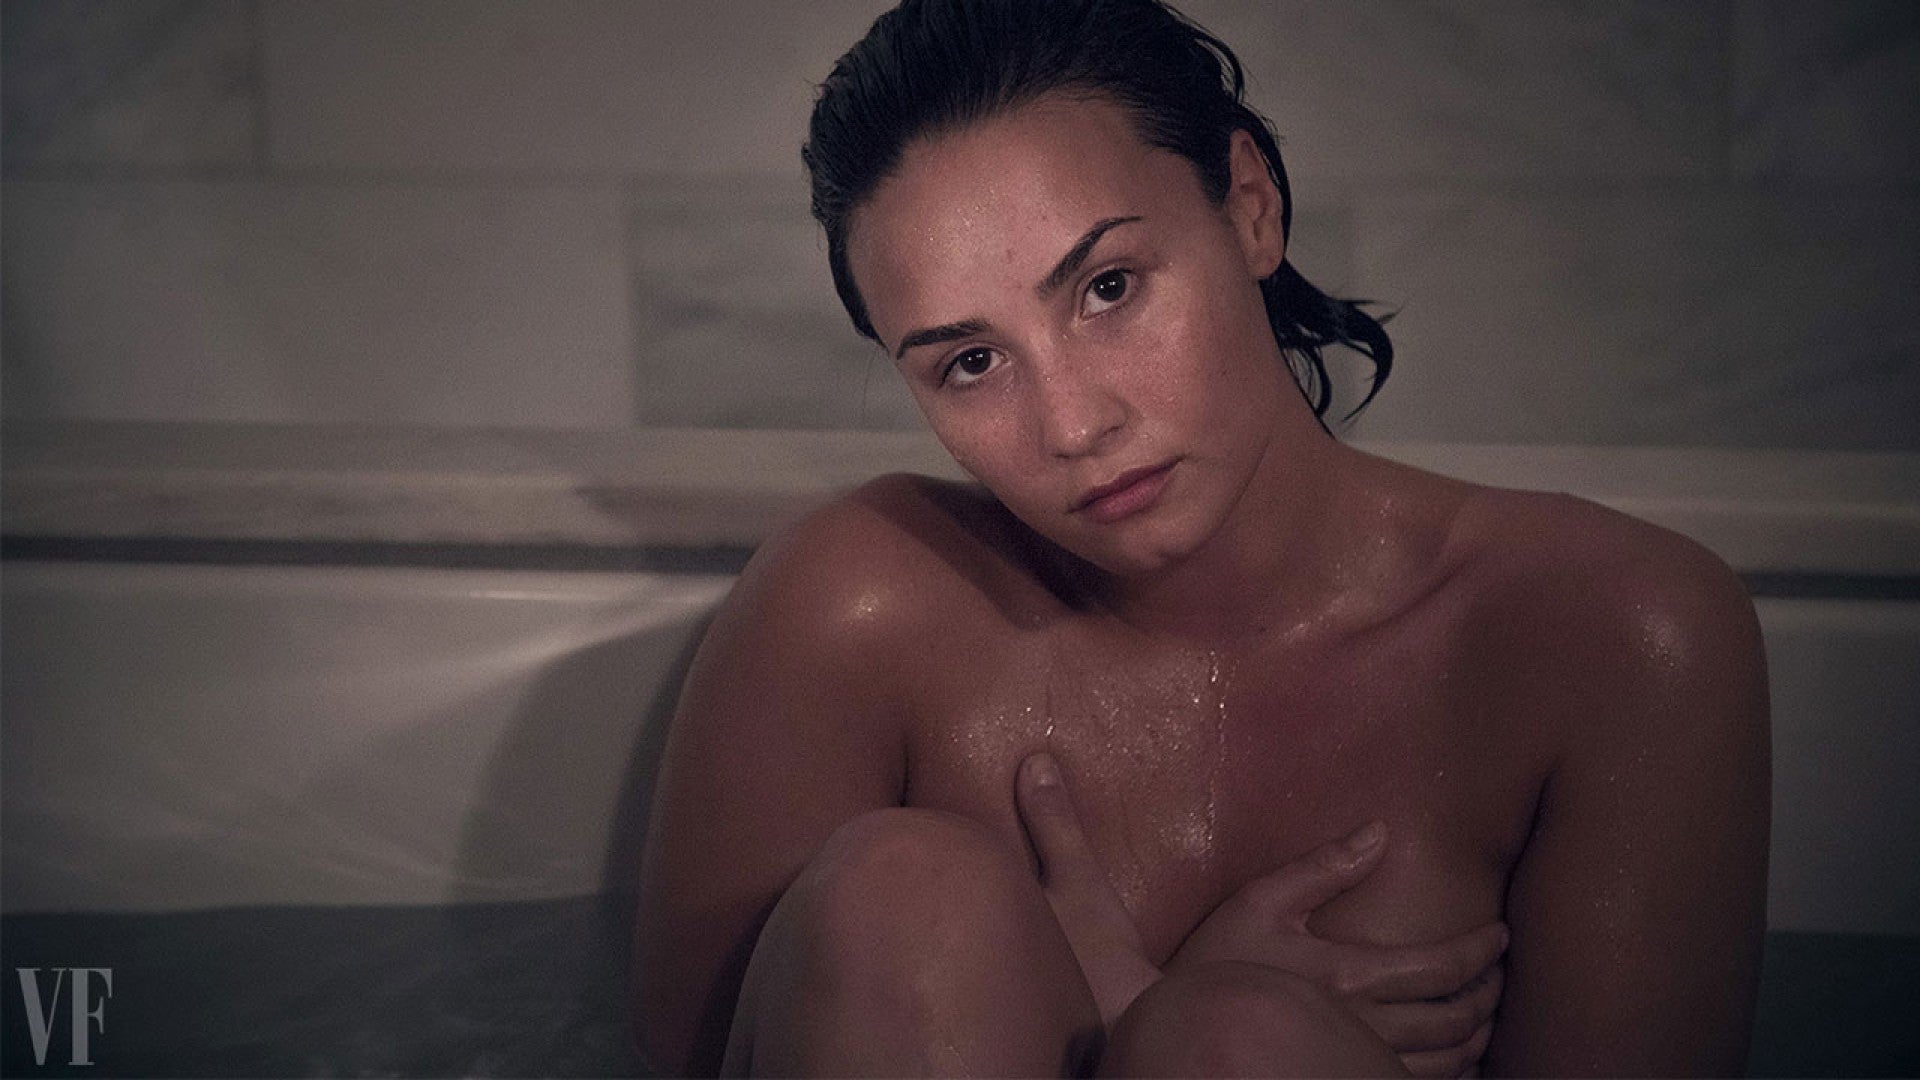 Free Lesbian Porn Demi Lovato - Demi Lovato Poses Completely Nude and Makeup-Free